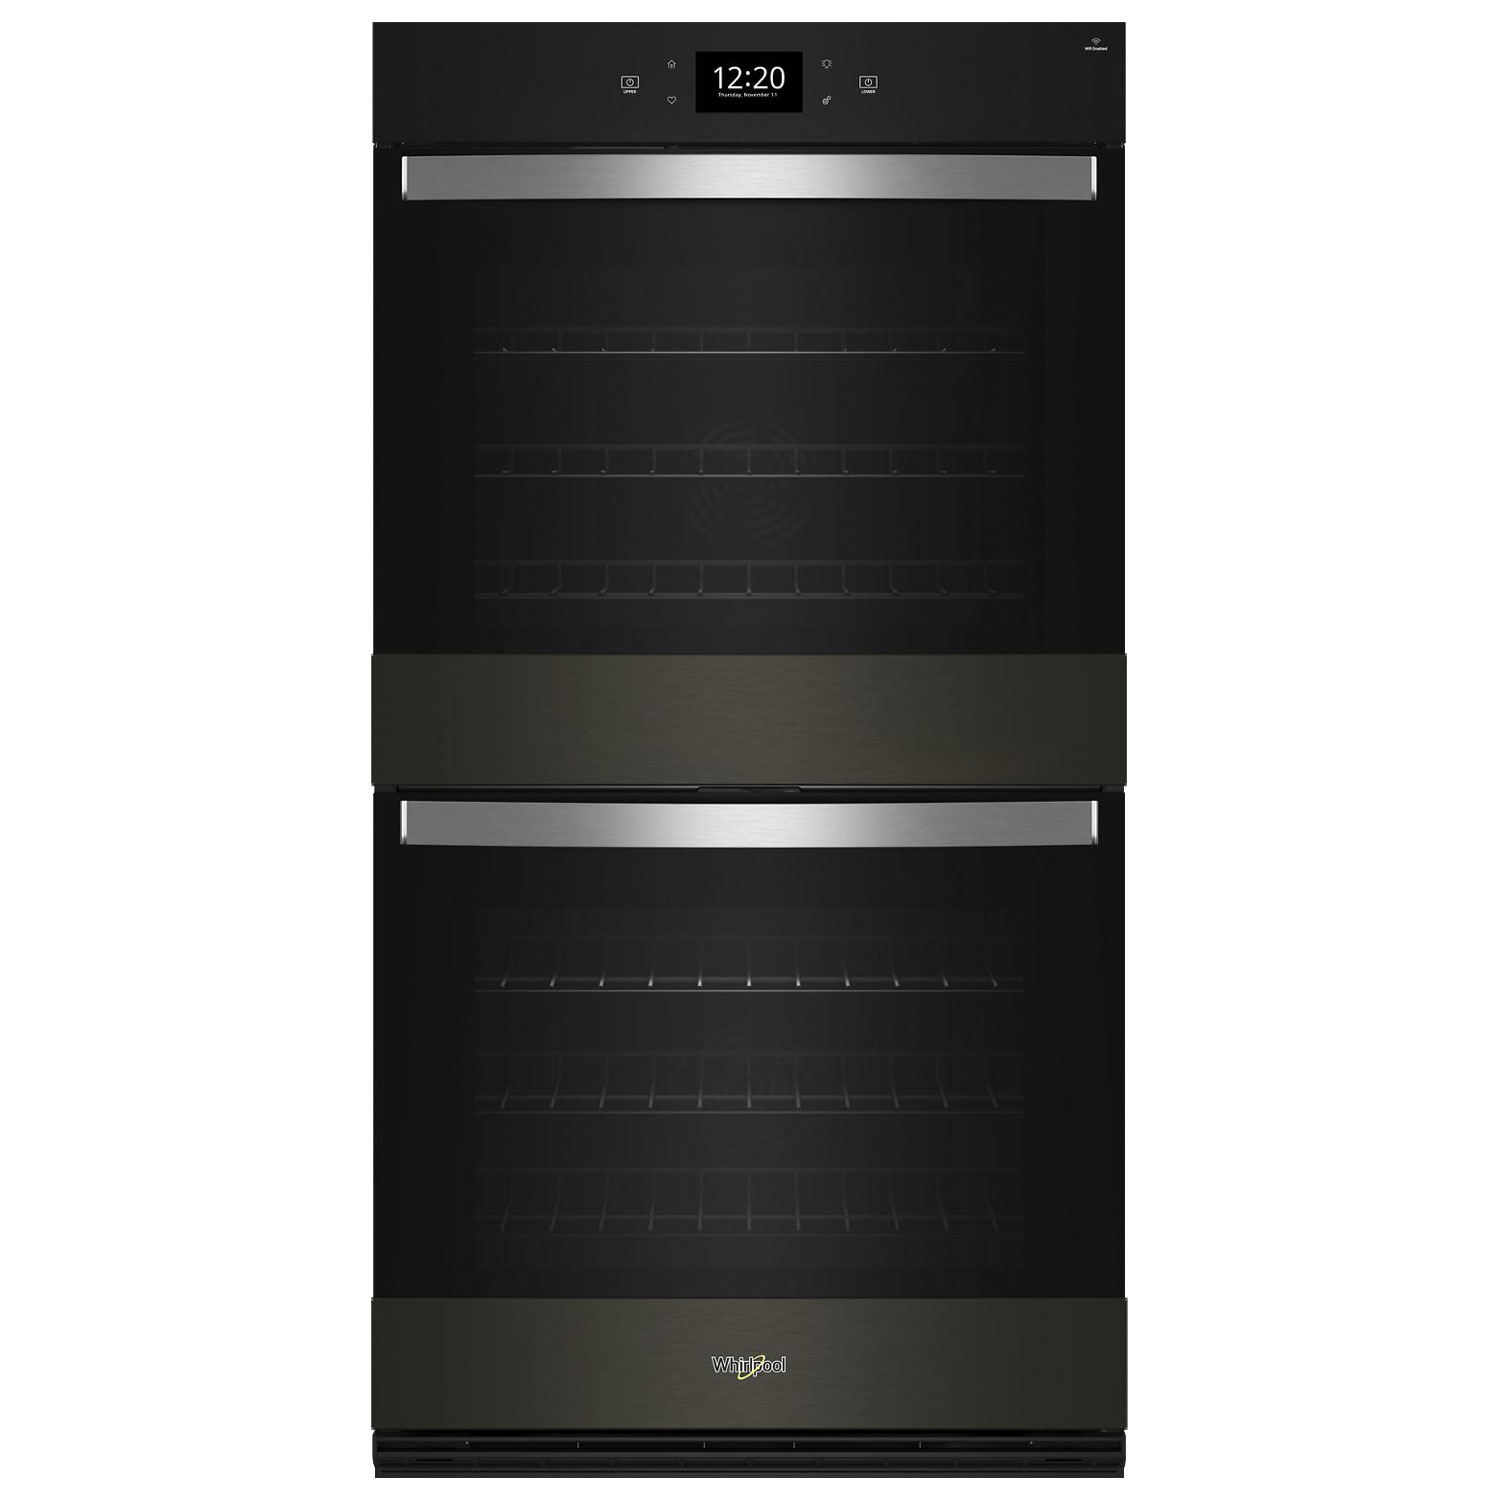 Whirlpool 30" 10 Cu. Ft. True Convection Electric Double Wall Oven (WOED7030PV)- Black Stainless Steel